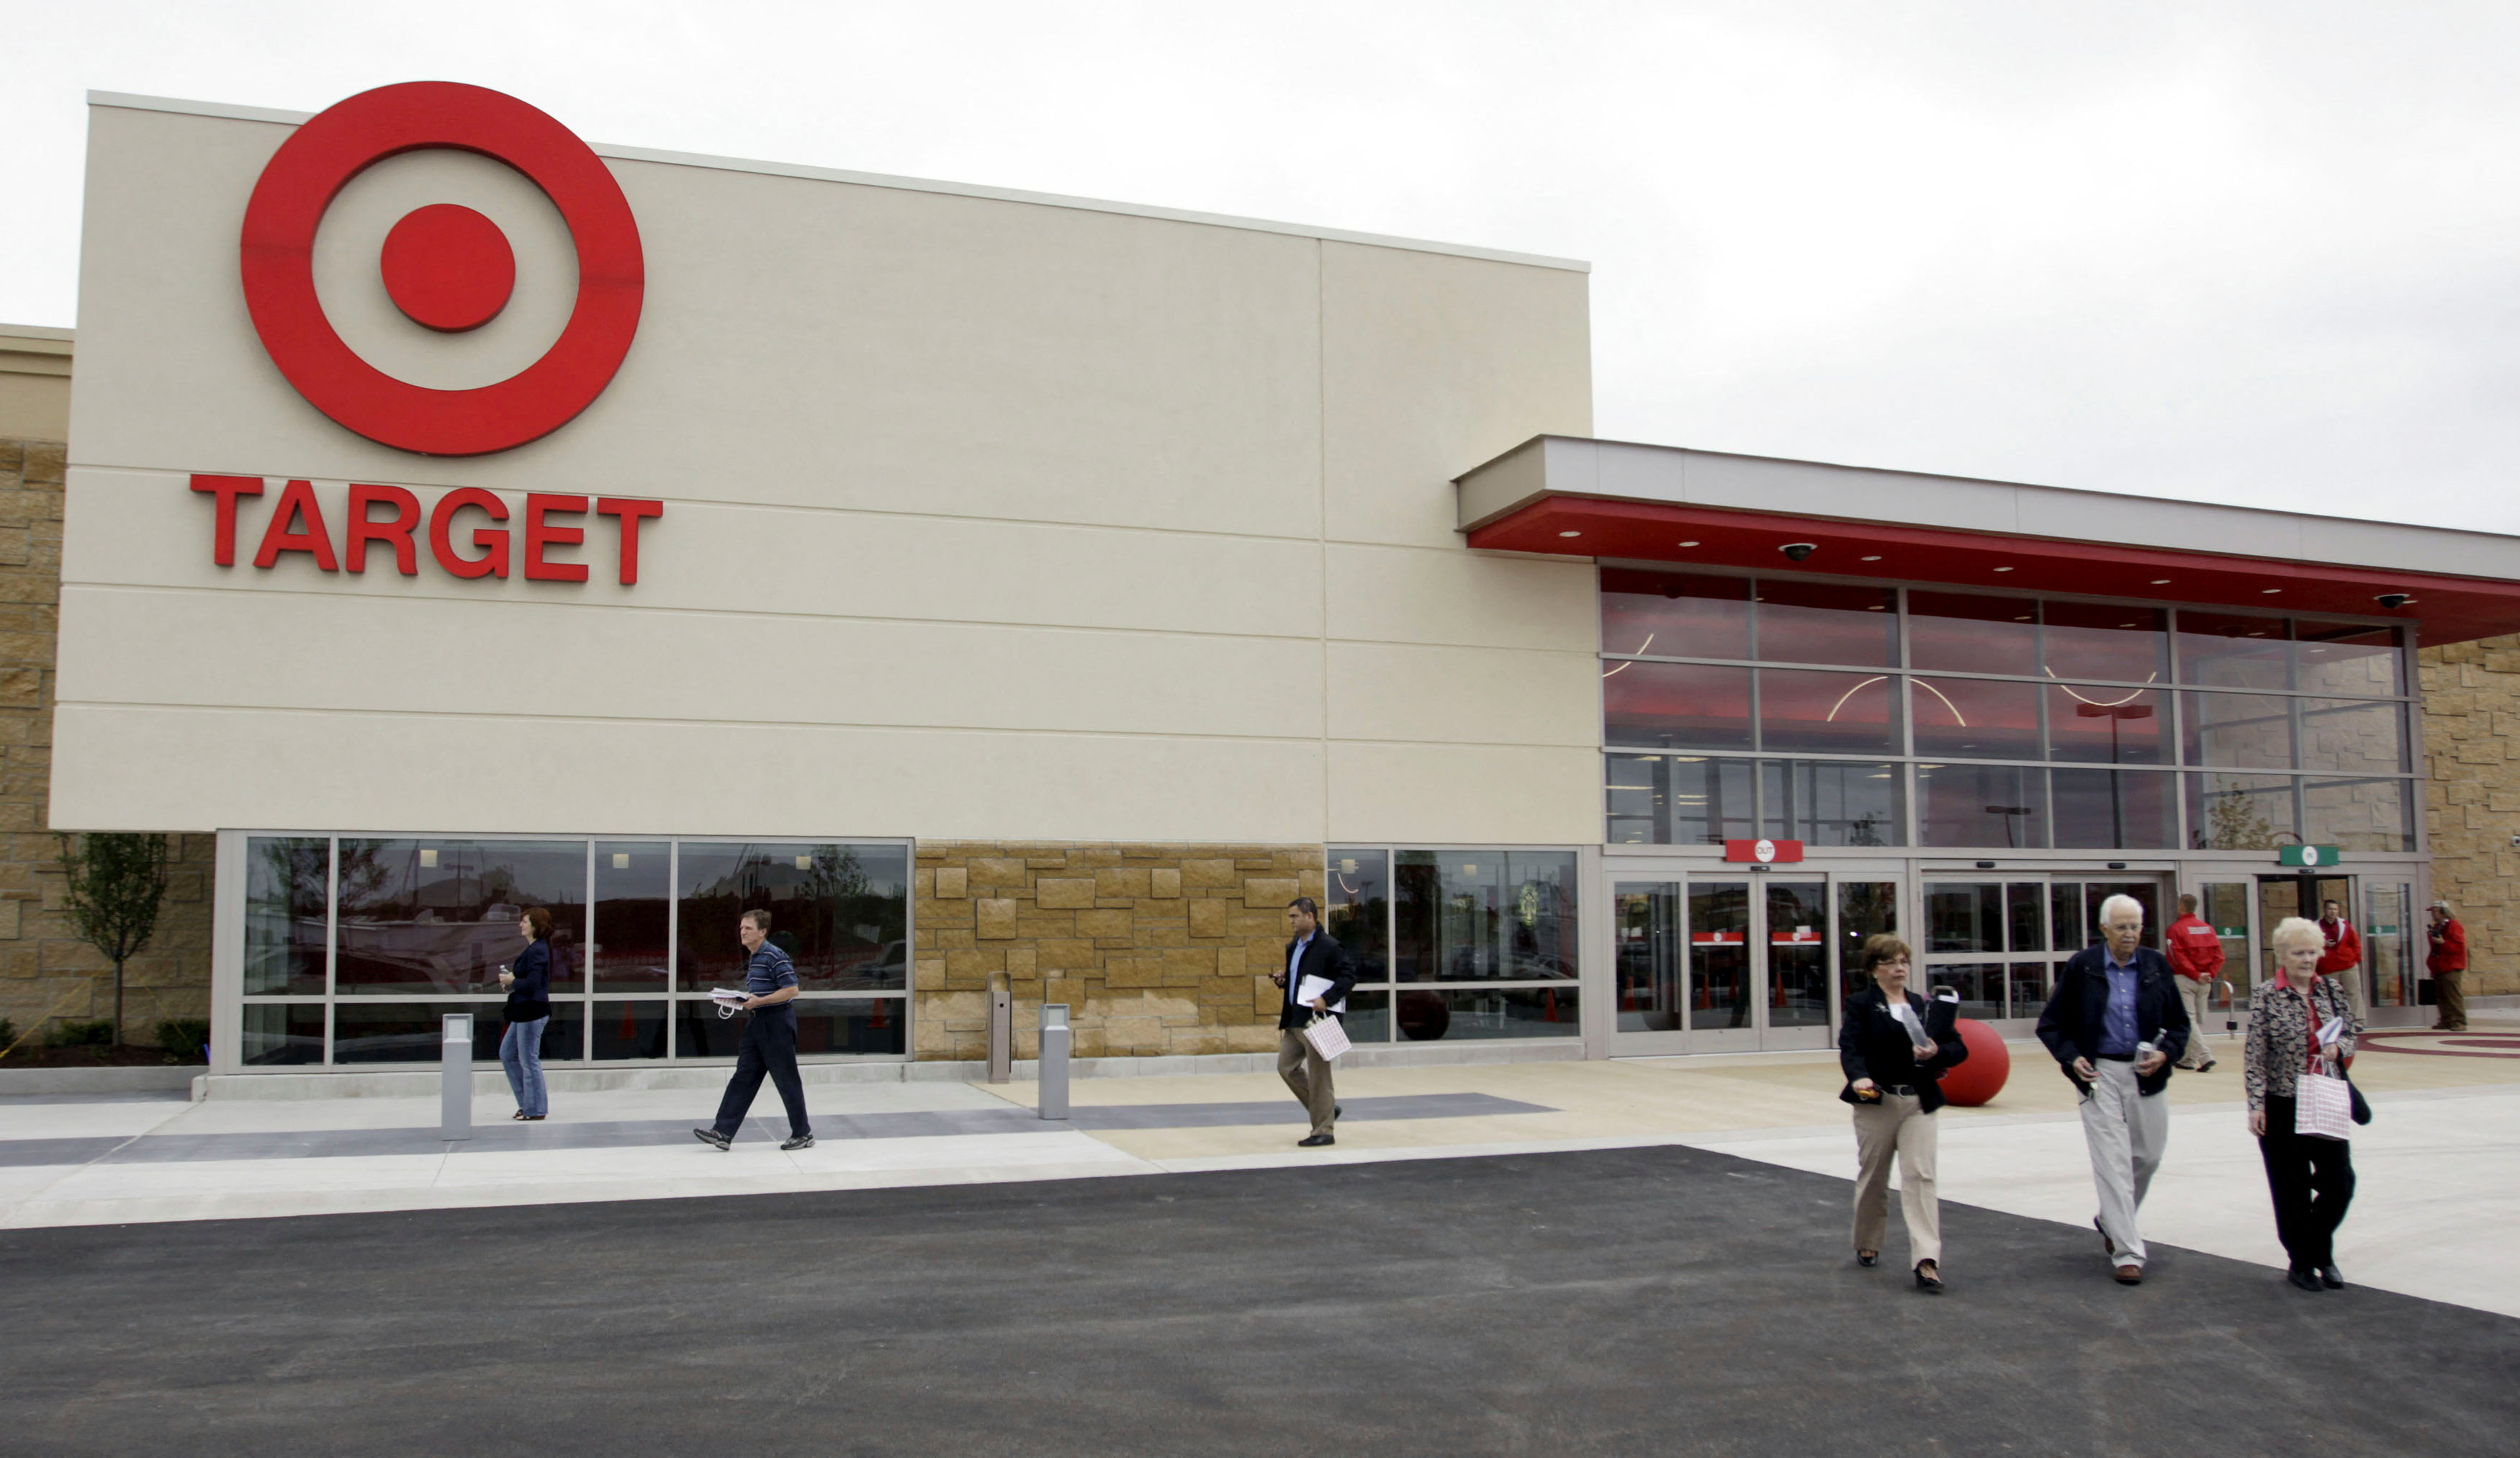 Target Corporation shareholders leave the annual shareholders meeting following a vote to keep the current Target board members at a new Target store in Waukesha